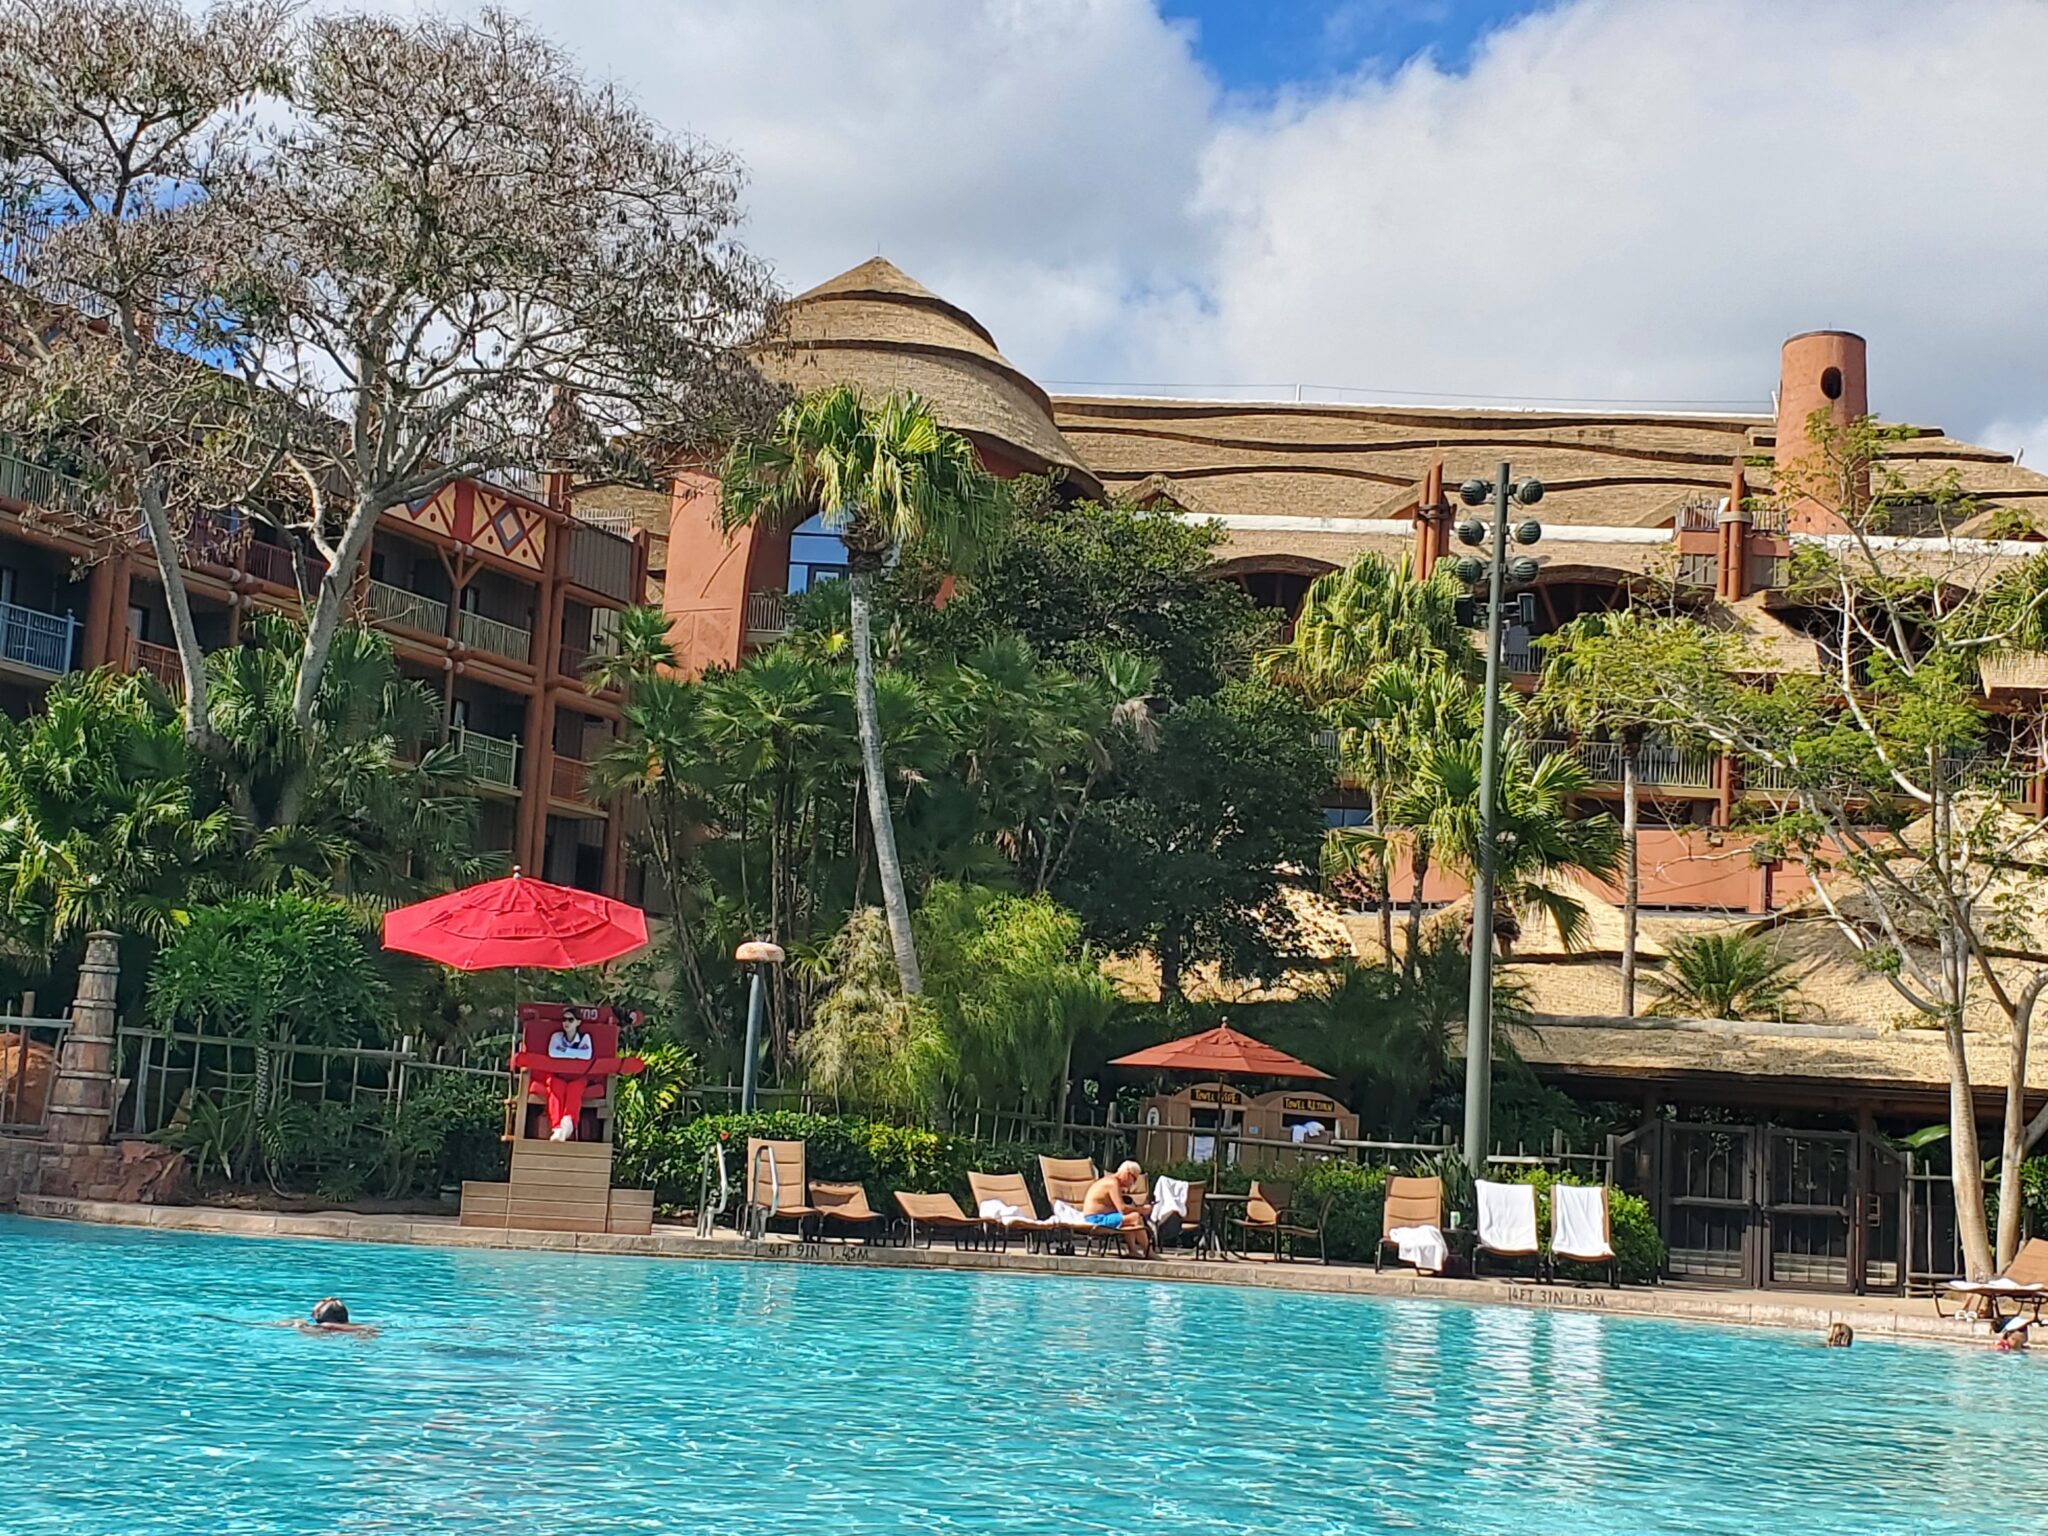 The Ups and Downs of Standard View at Disney's Animal Kingdom Lodge - Tips  from the Disney Divas and Devos